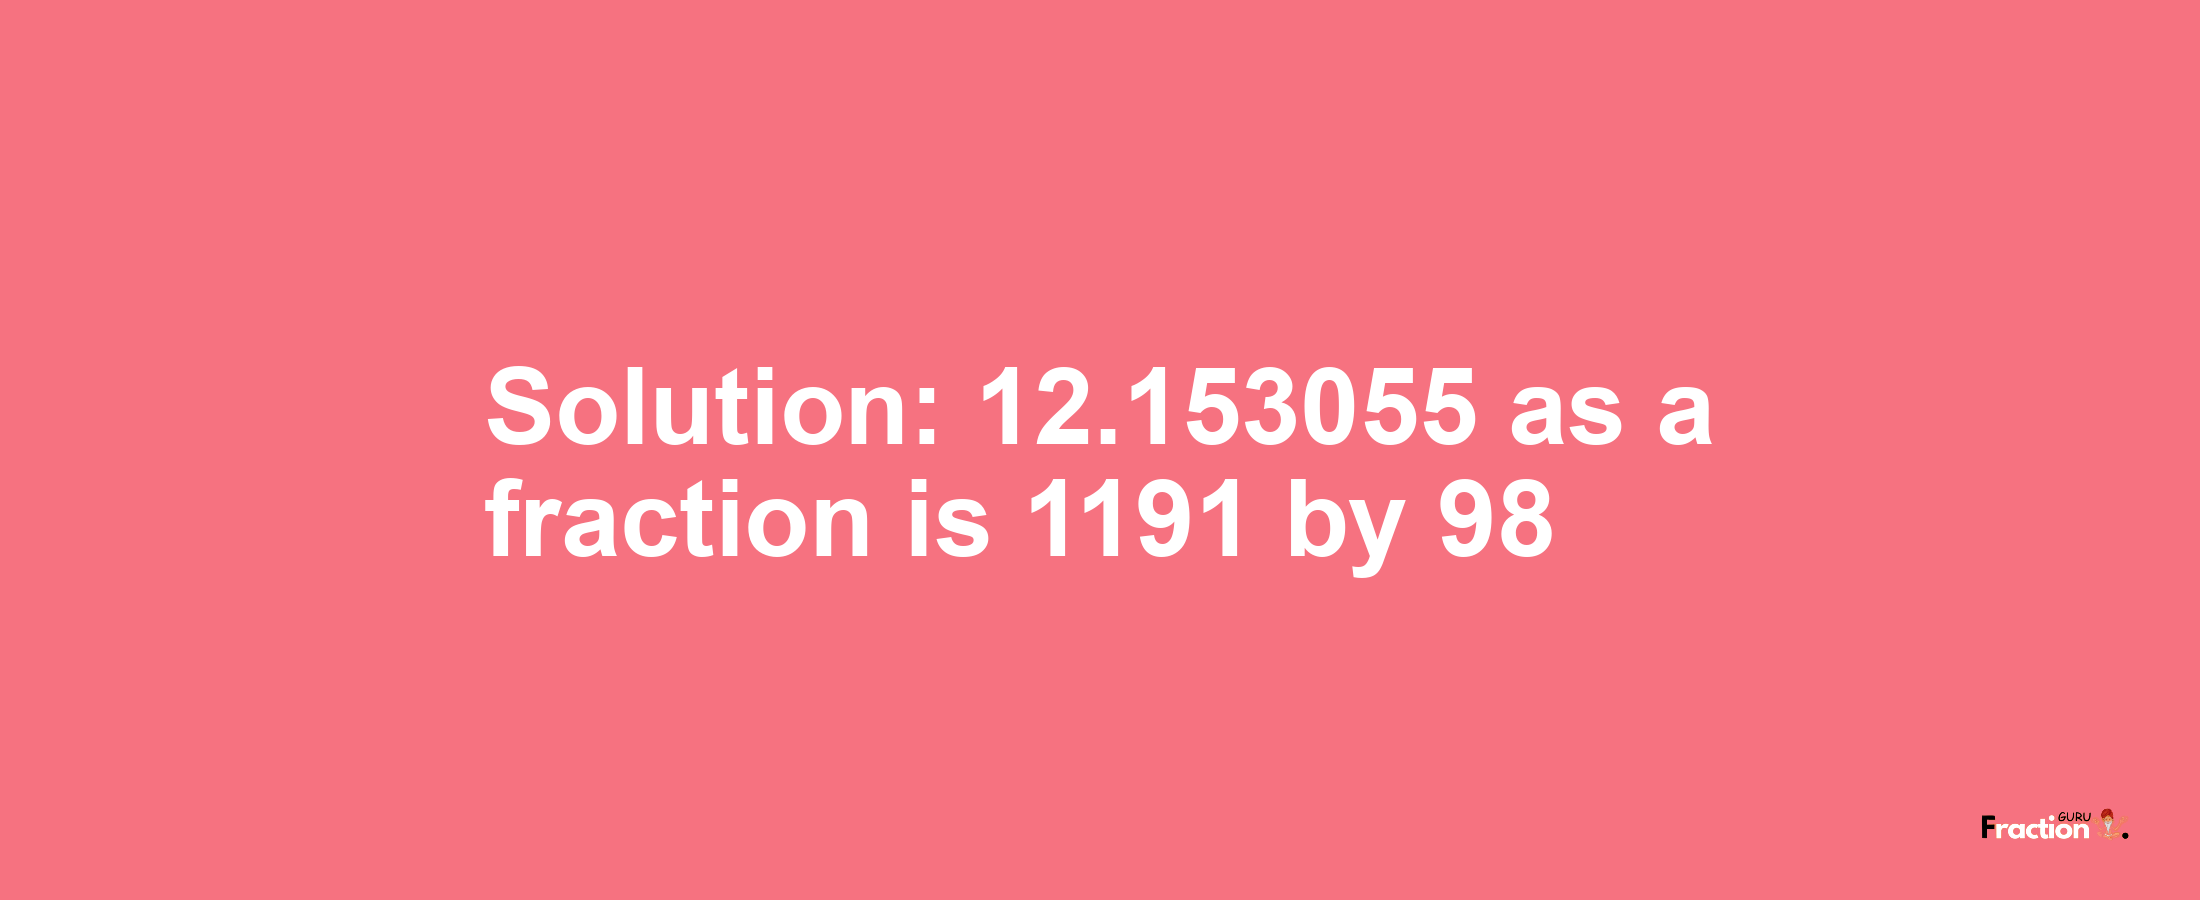 Solution:12.153055 as a fraction is 1191/98